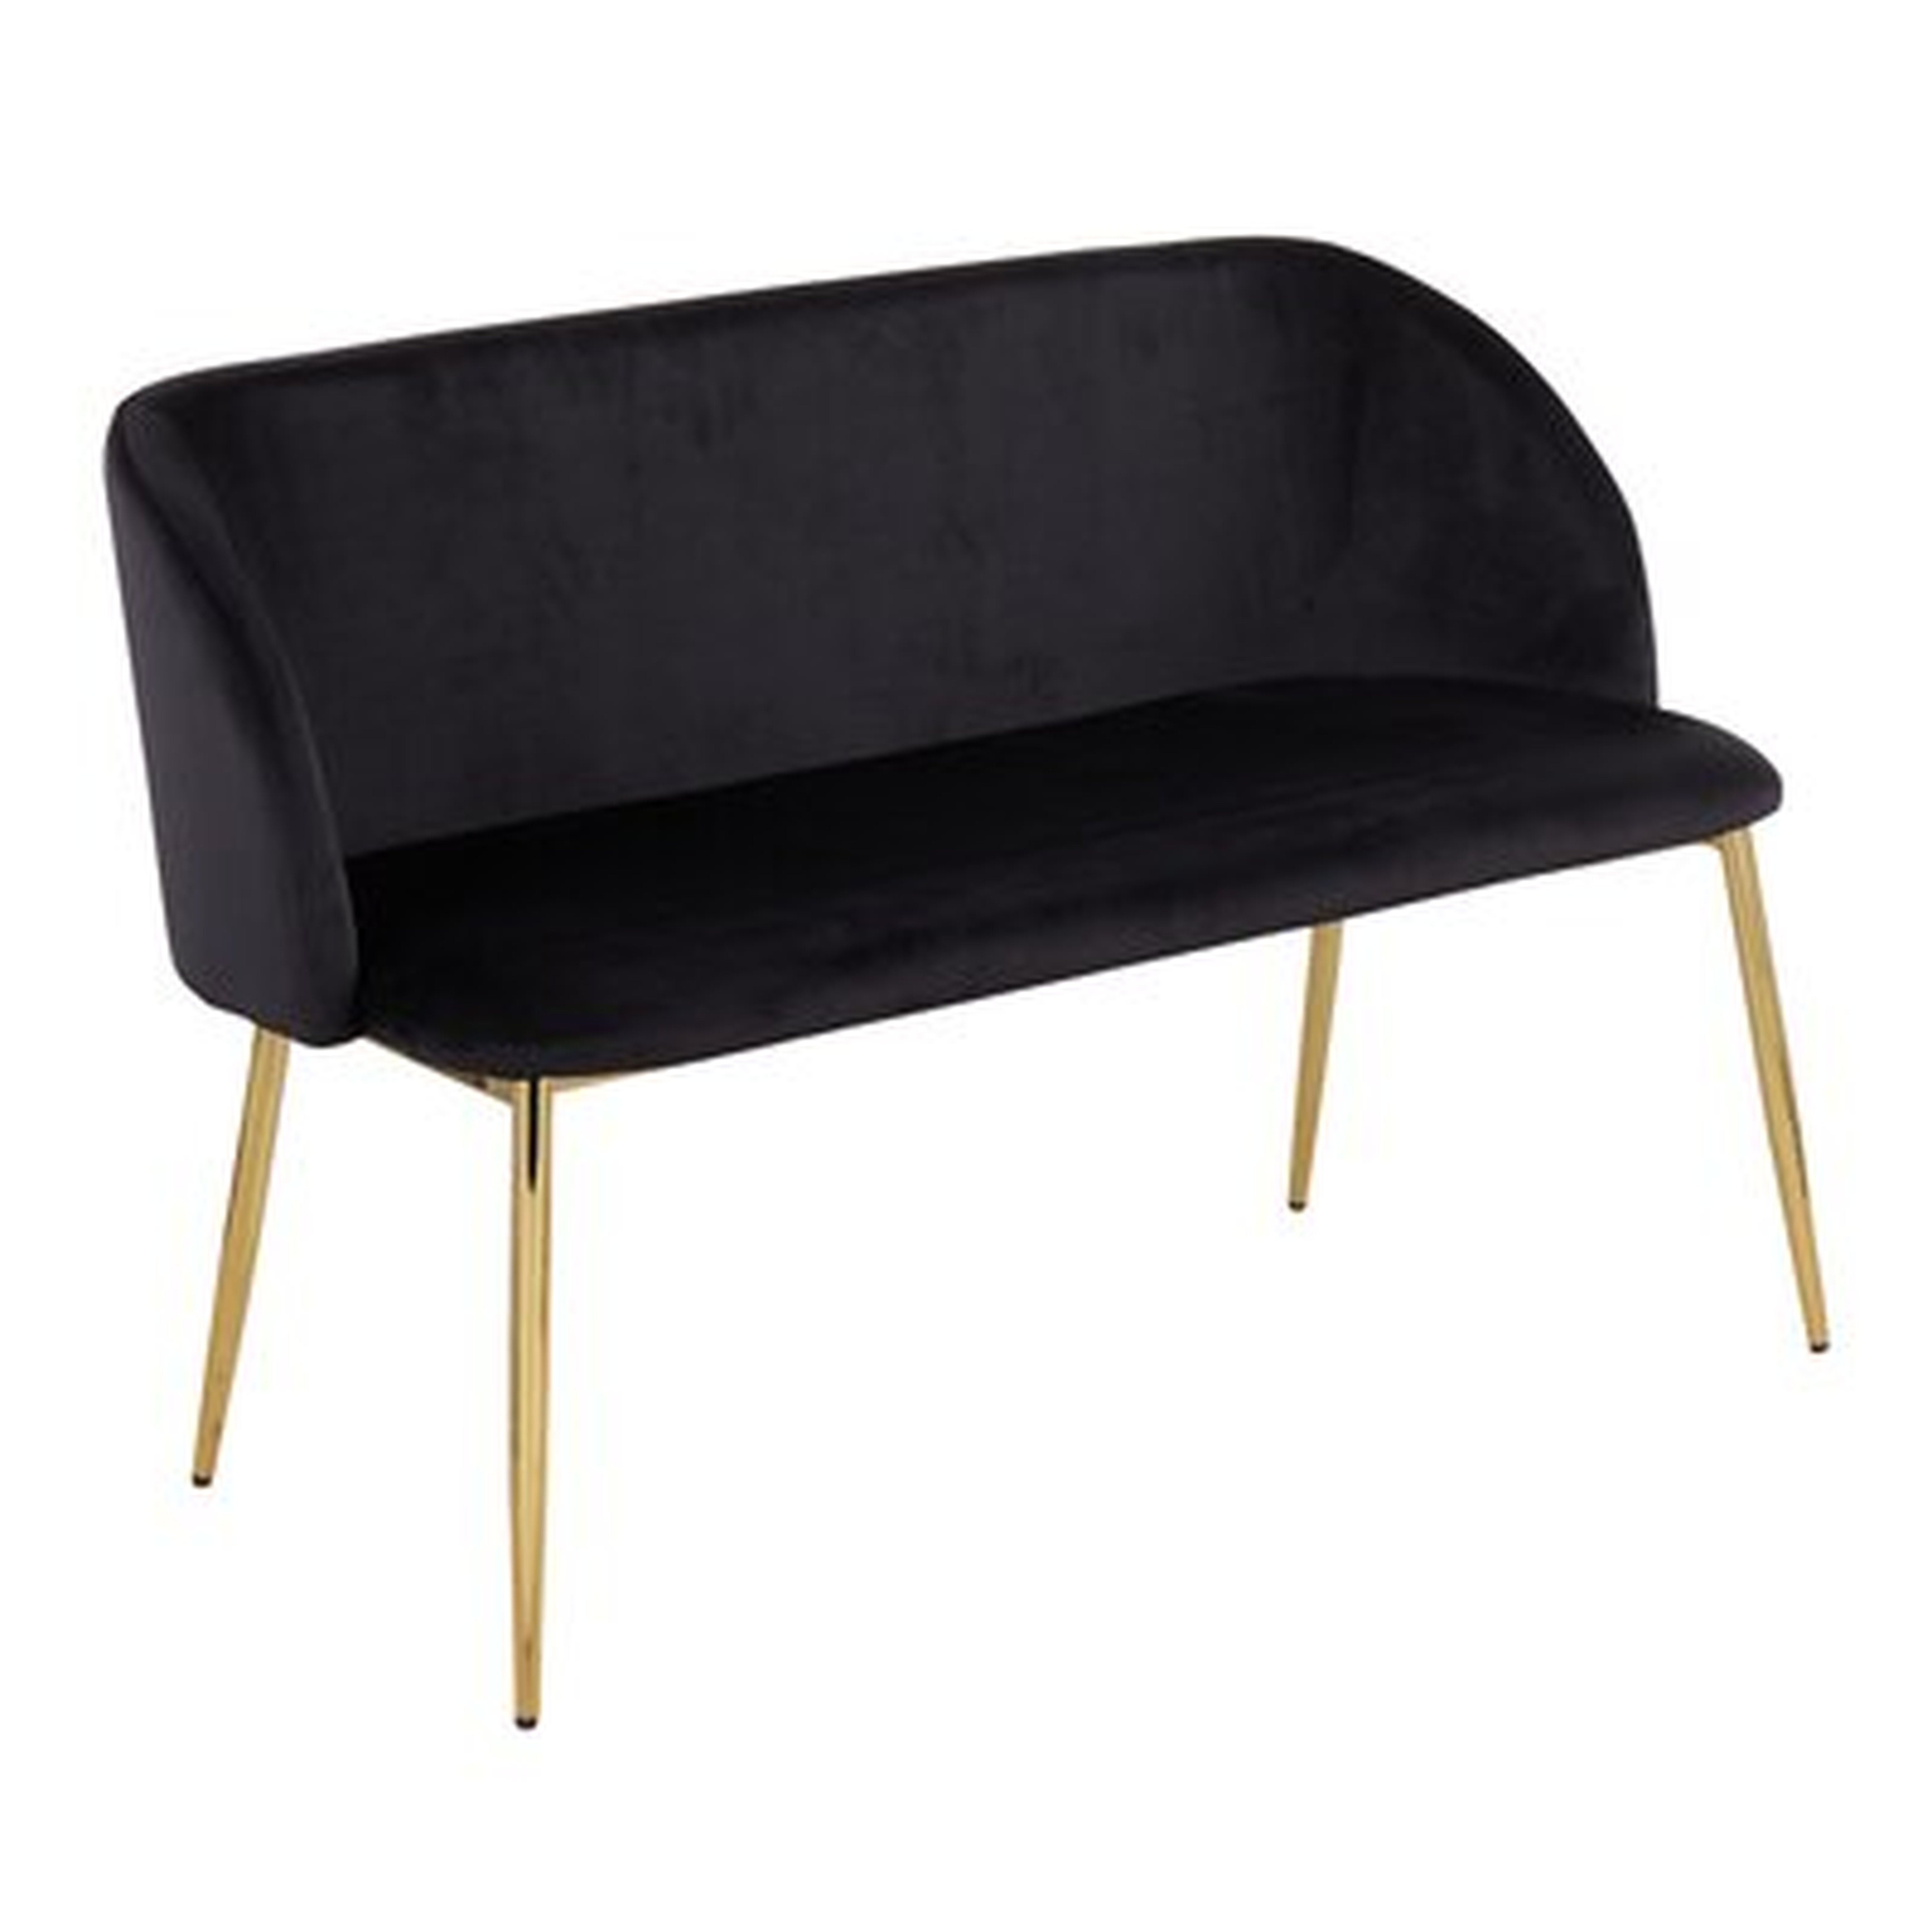 Drumnagee Glam Bench In Gold Steel And Black Velvet By Everly Quinn - Wayfair